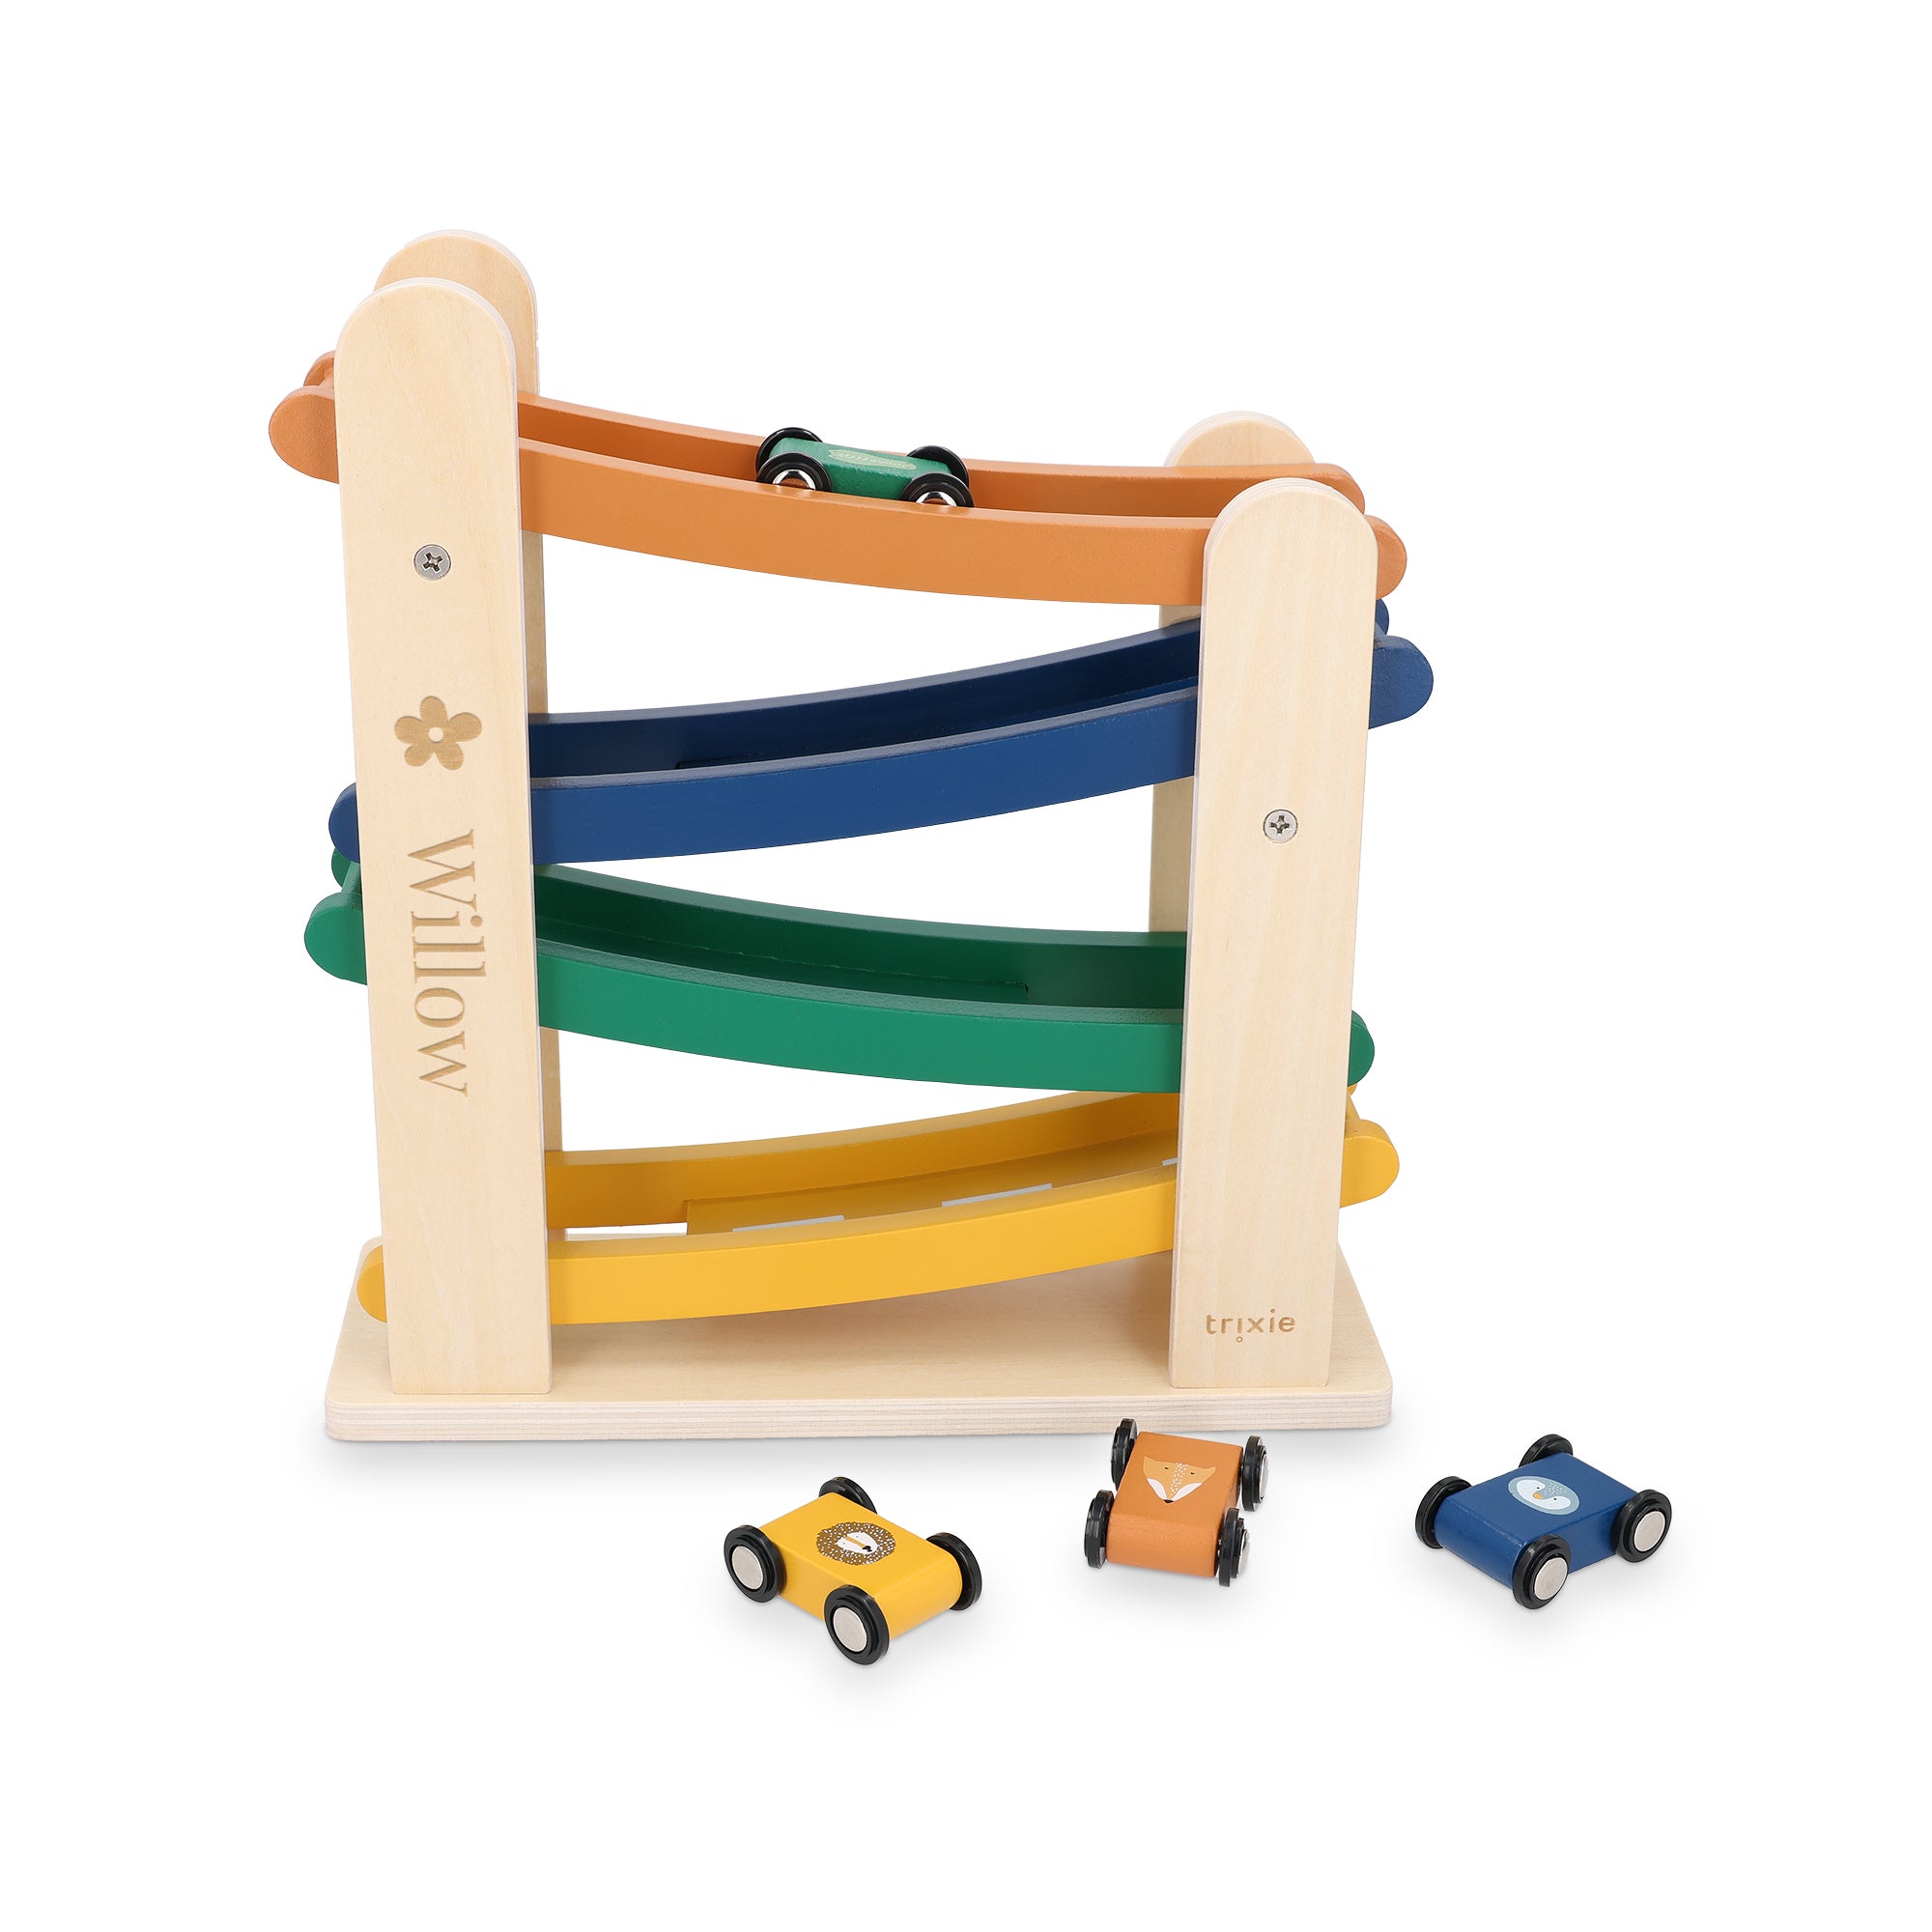 Personalised wooden ramp racer toy - Trixie